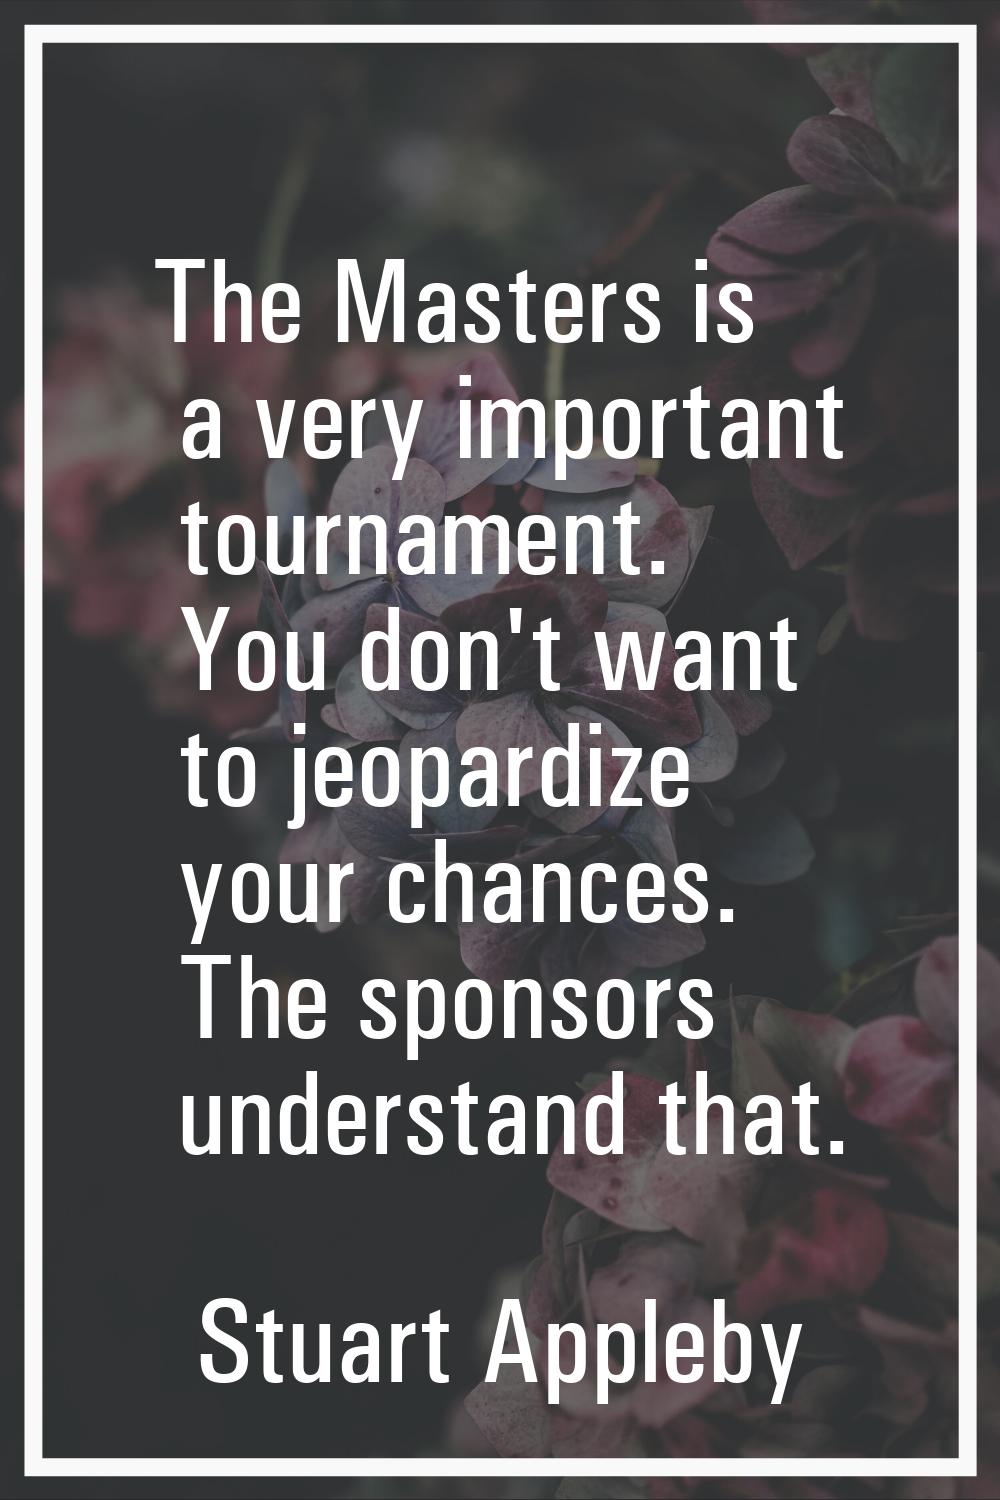 The Masters is a very important tournament. You don't want to jeopardize your chances. The sponsors